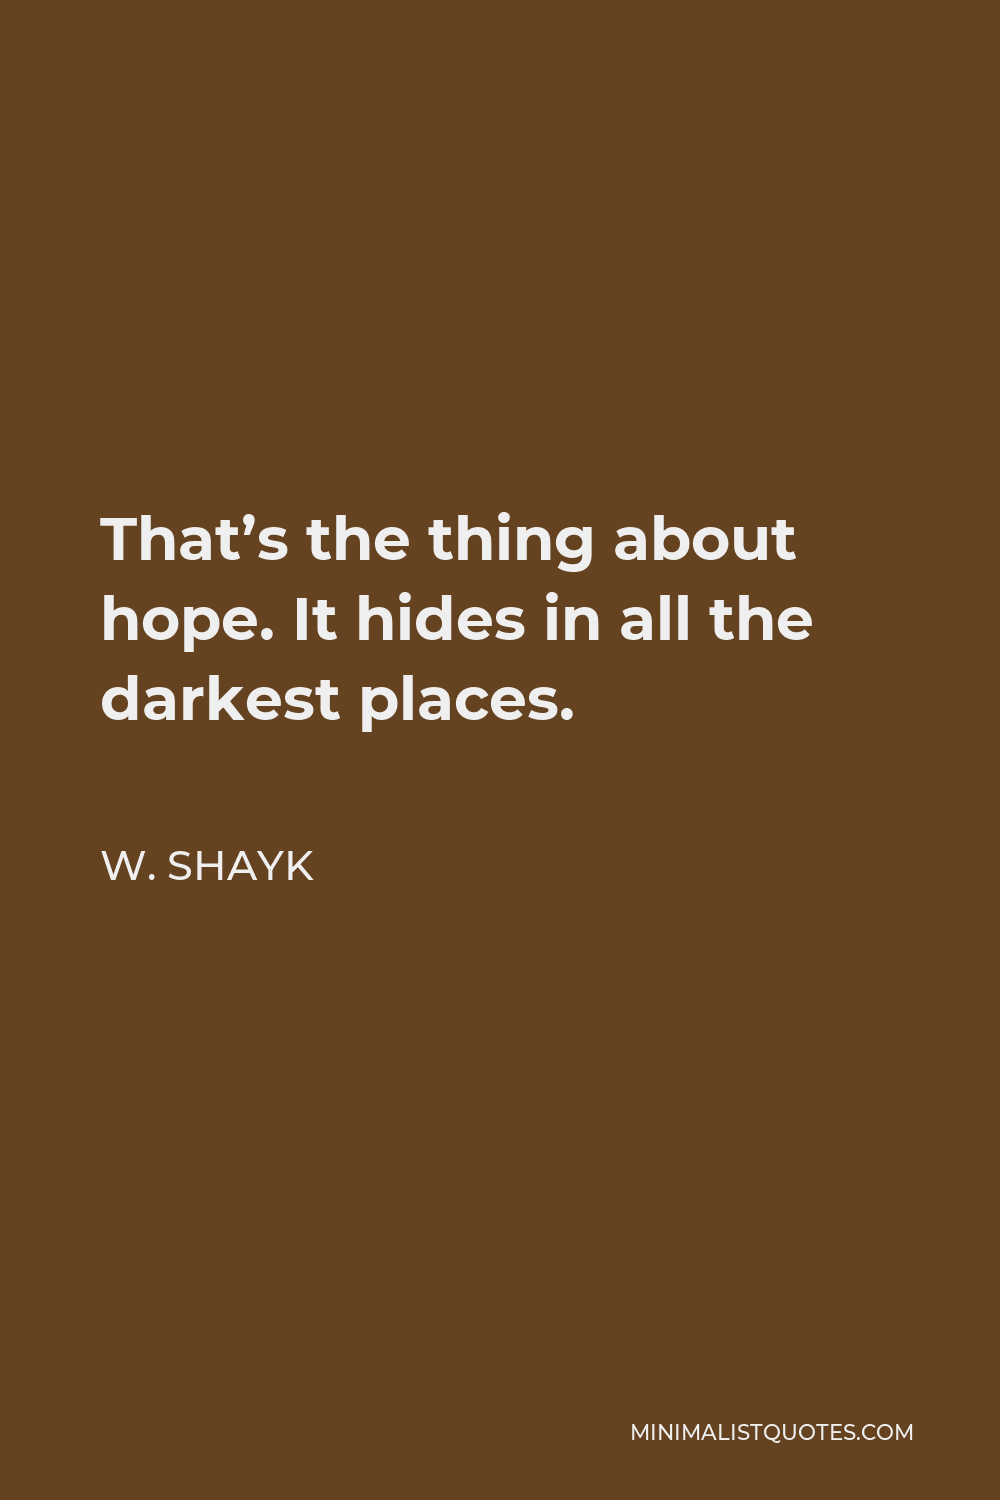 W. Shayk Quote - That’s the thing about hope. It hides in all the darkest places.